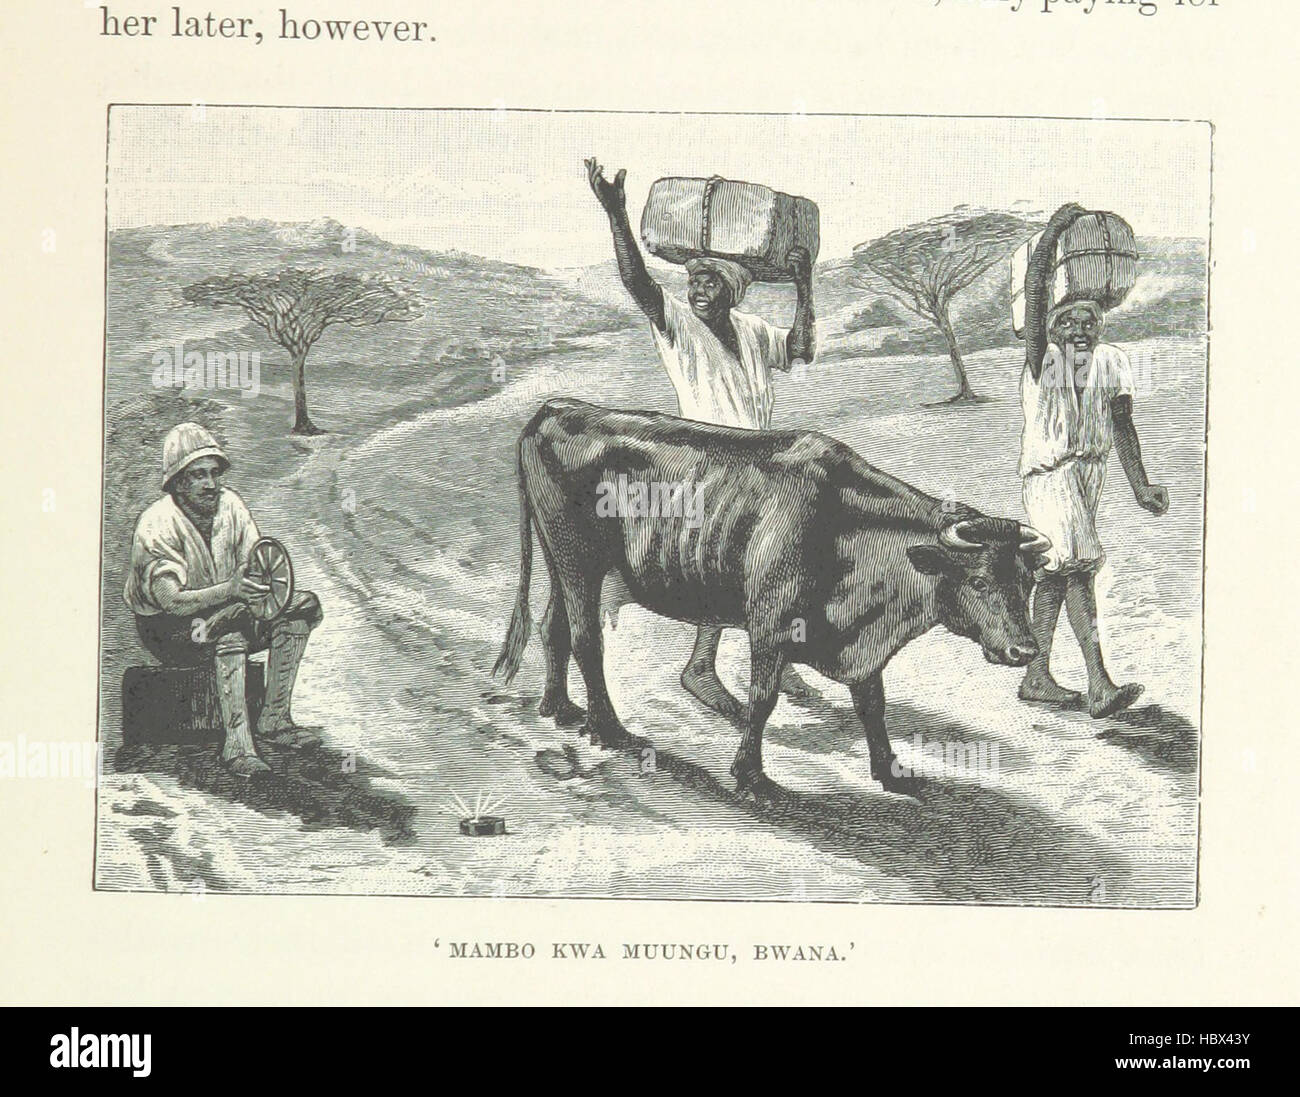 Discovery of Lakes Rudolf and Stefanie: a narrative of Count S. Teleki's exploring and hunting expedition in Eastern Equatorial Africa ... Translated by N. Bell. With ... illustrations, etc Image taken from page 449 of 'Discovery of Lakes Rudolf Stock Photo